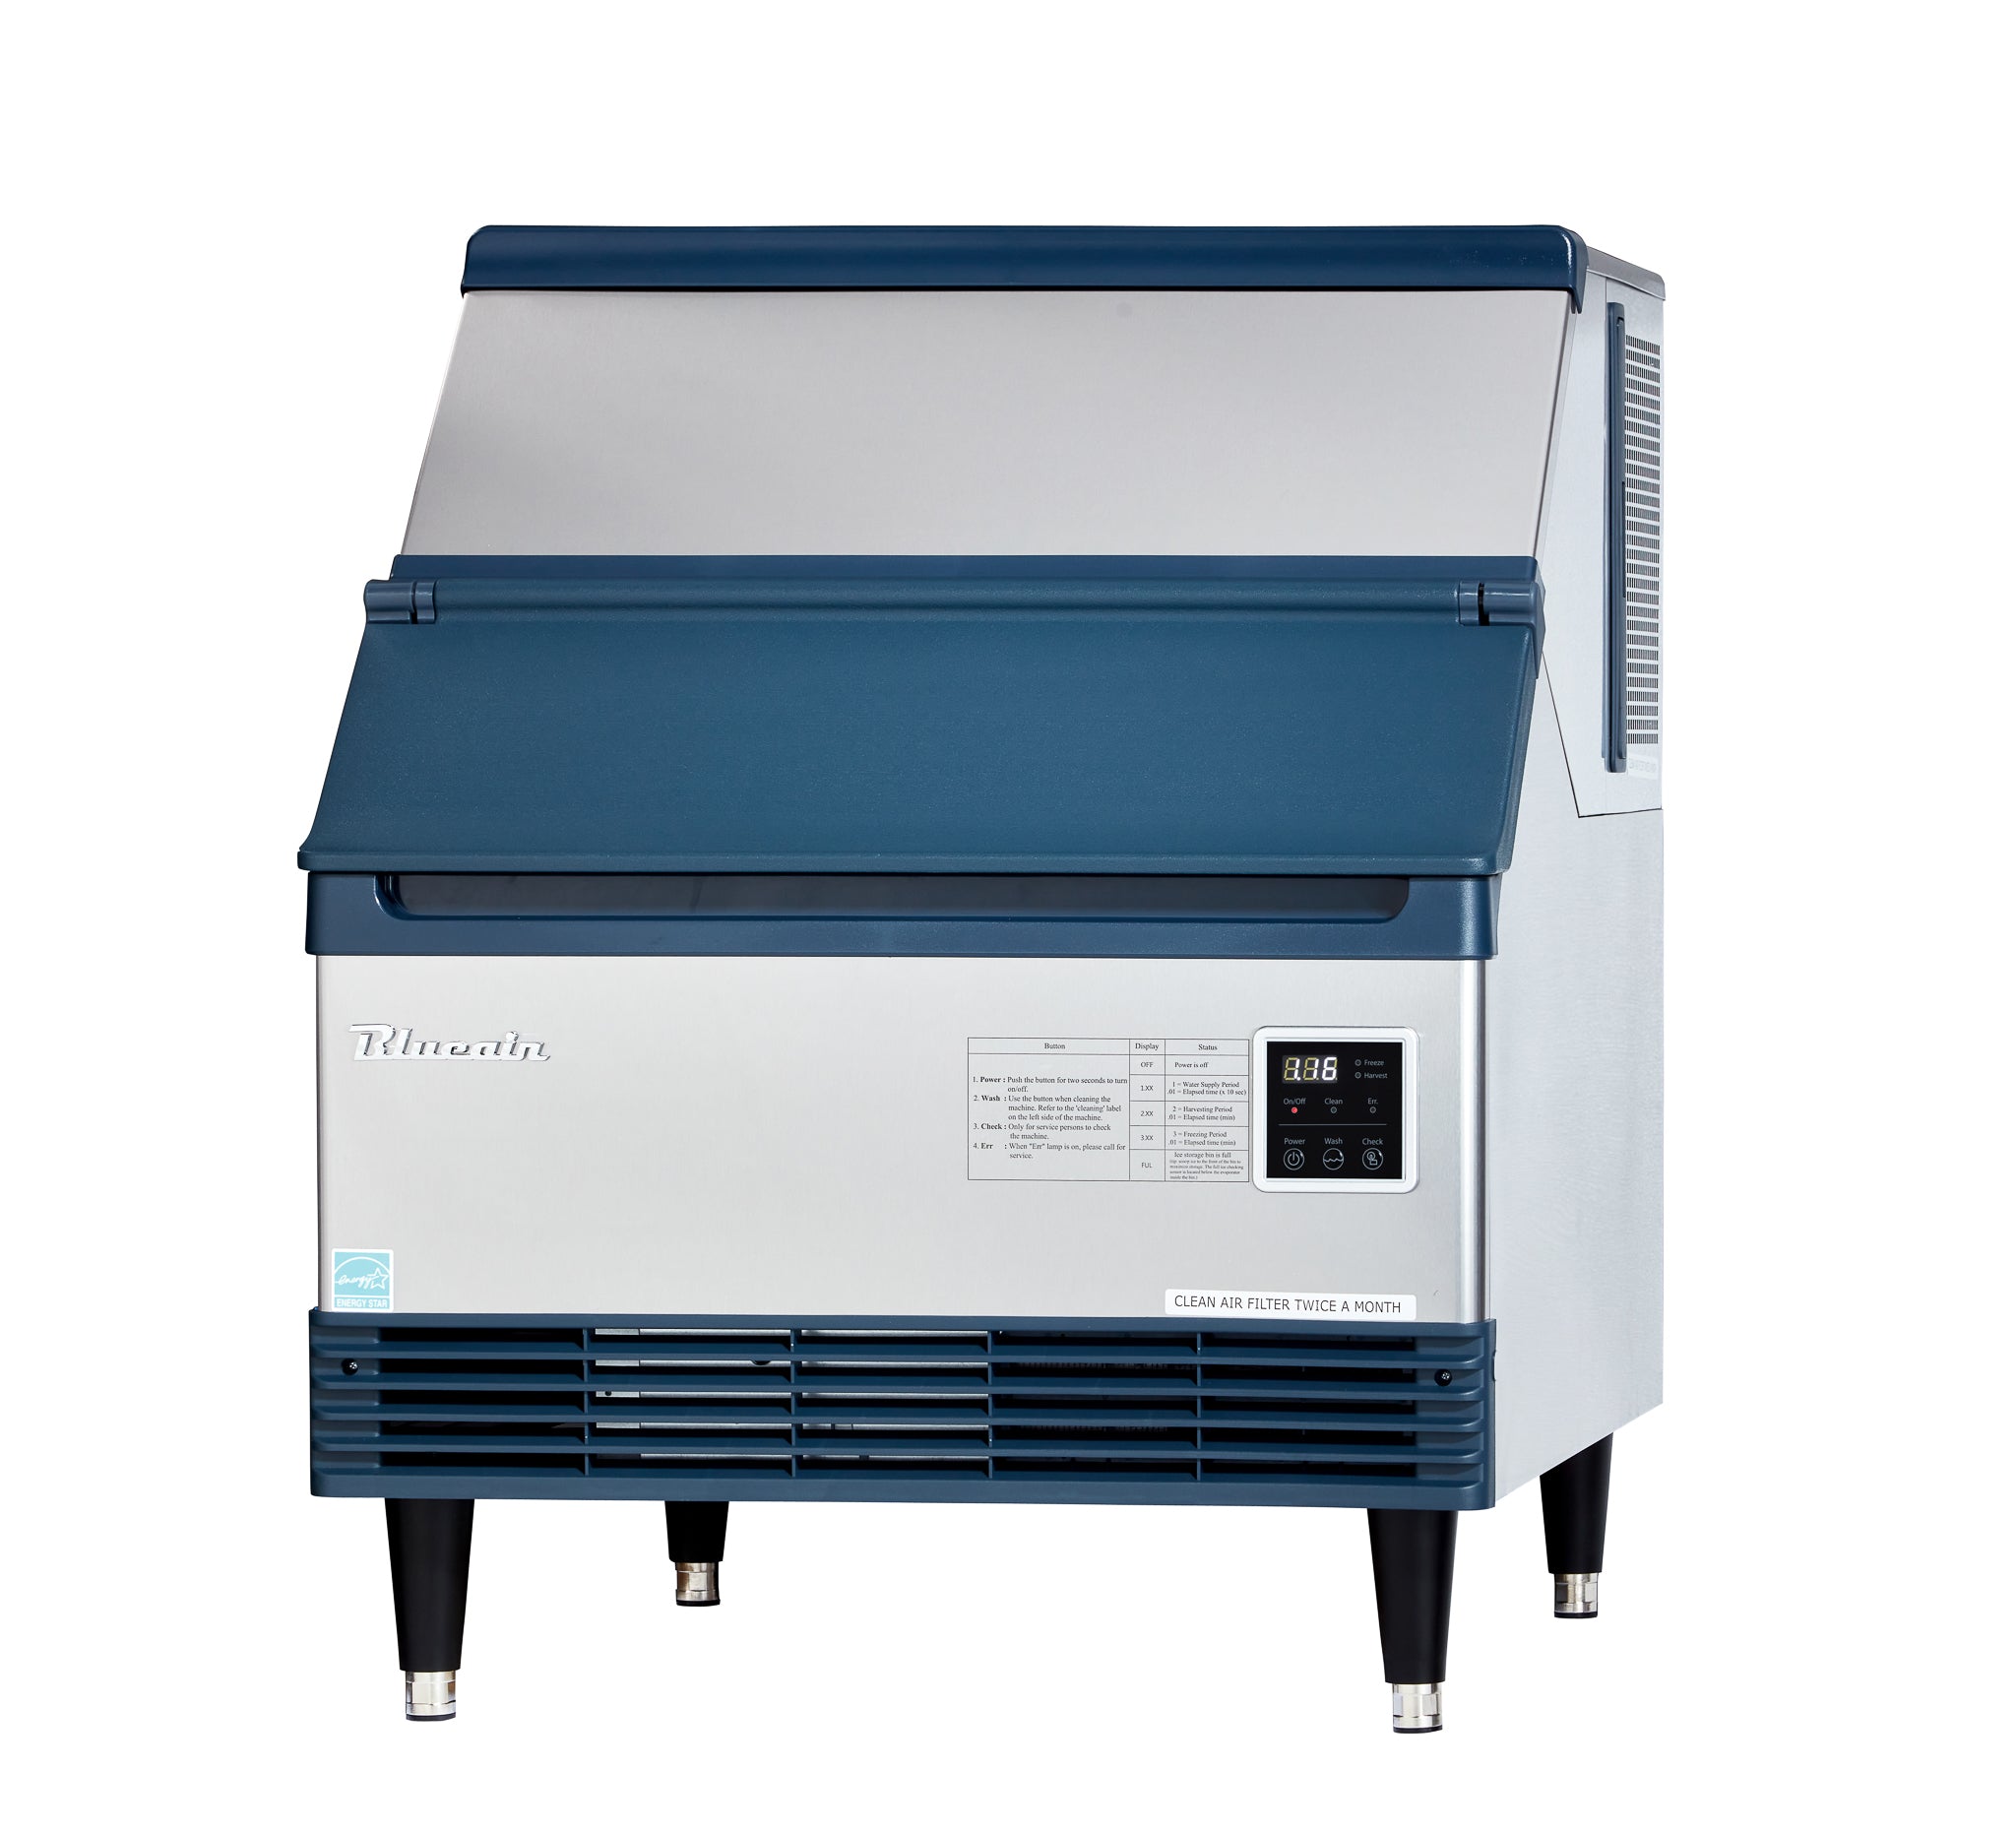 Blue Air - BLUI-250A, 251 Lbs Production, 96 lbs Storage, 30" W x 30" D x 38 1/2"H, 115v/60/1, Energy Star Rated